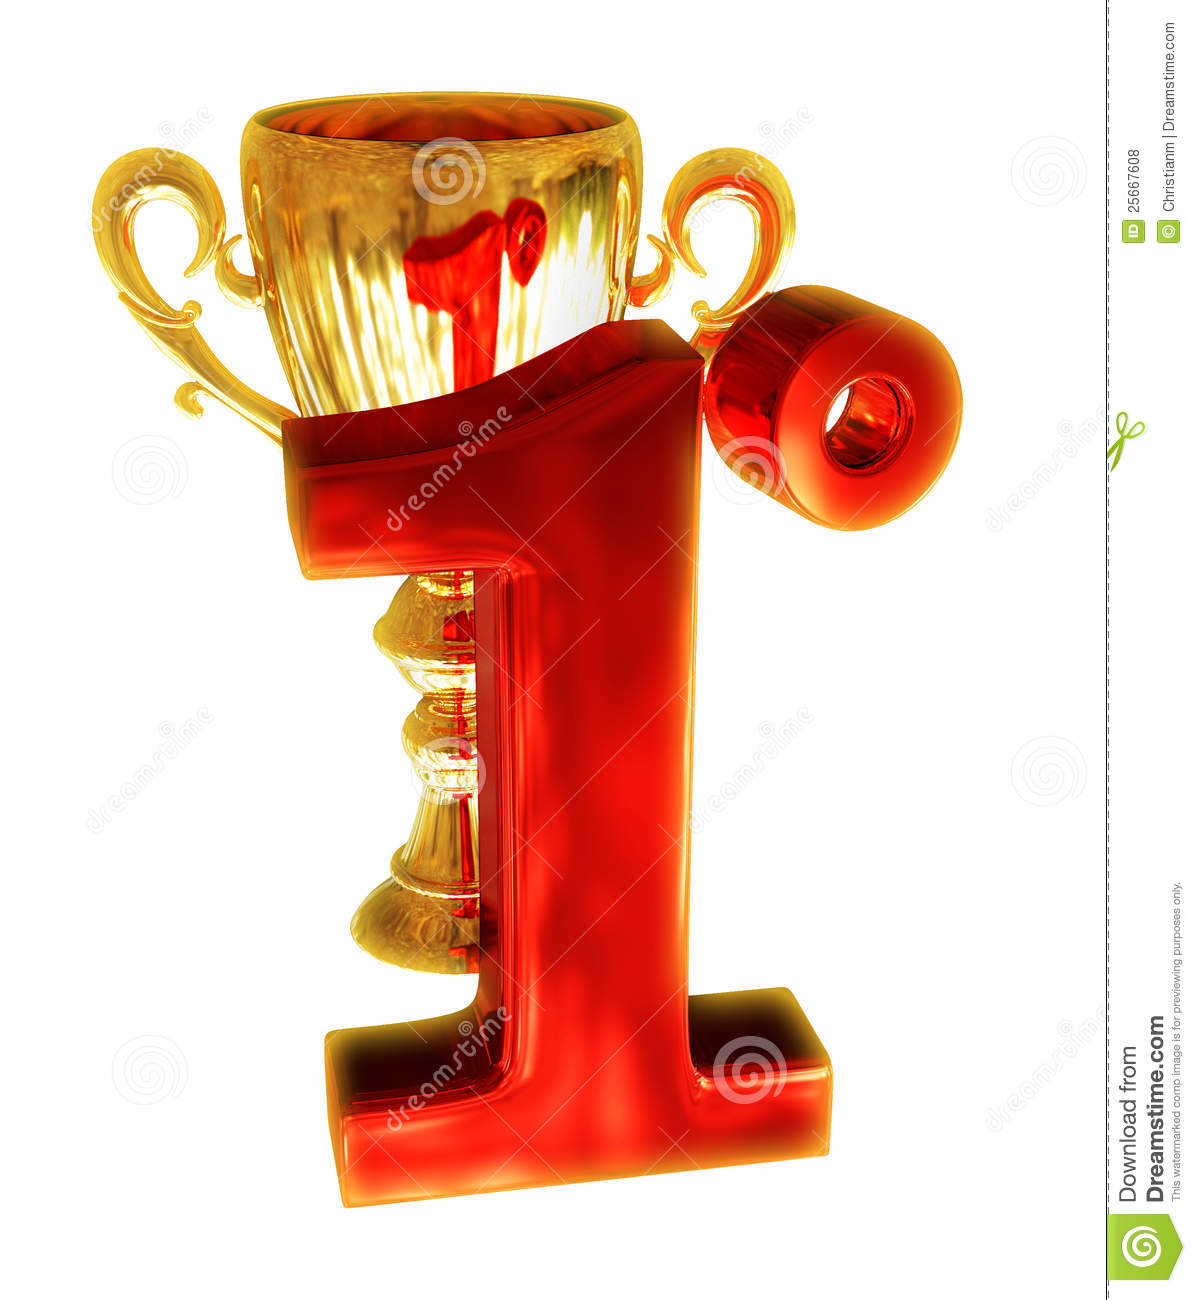 Illustration  A Big Glowing Red One In Front Of A Golden Prize